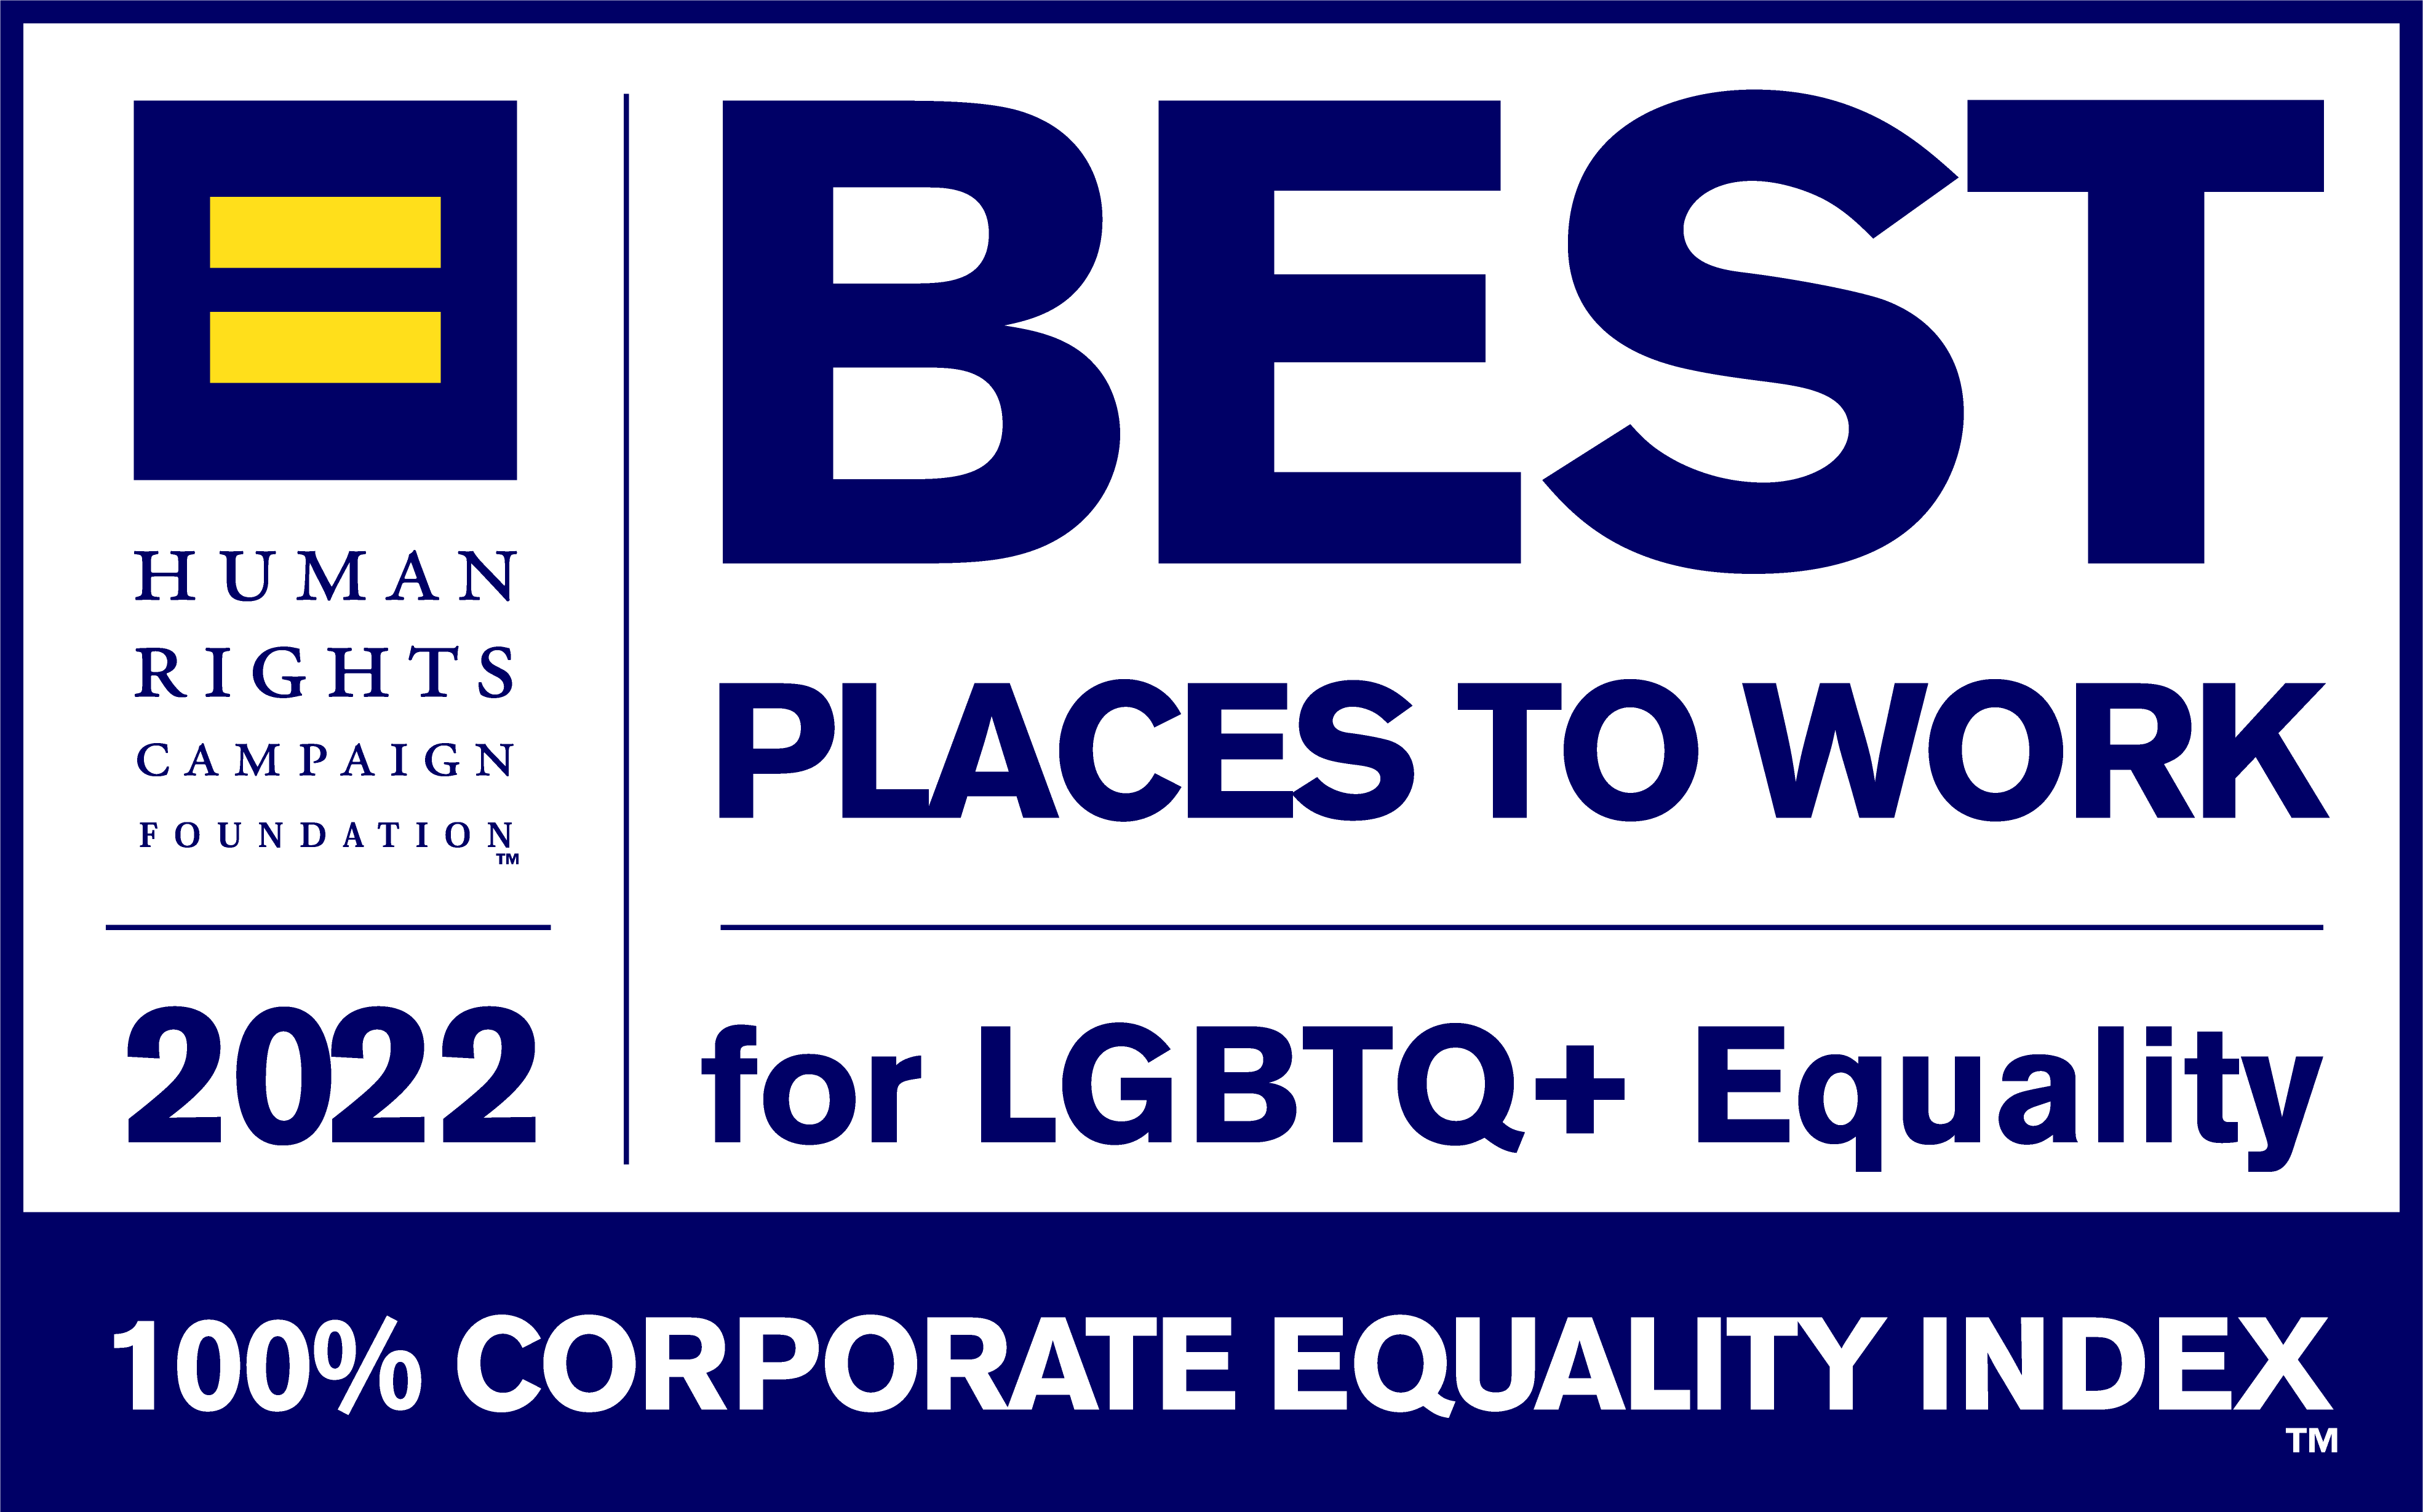 Best Places to Work for LGBTQ Equality 2022